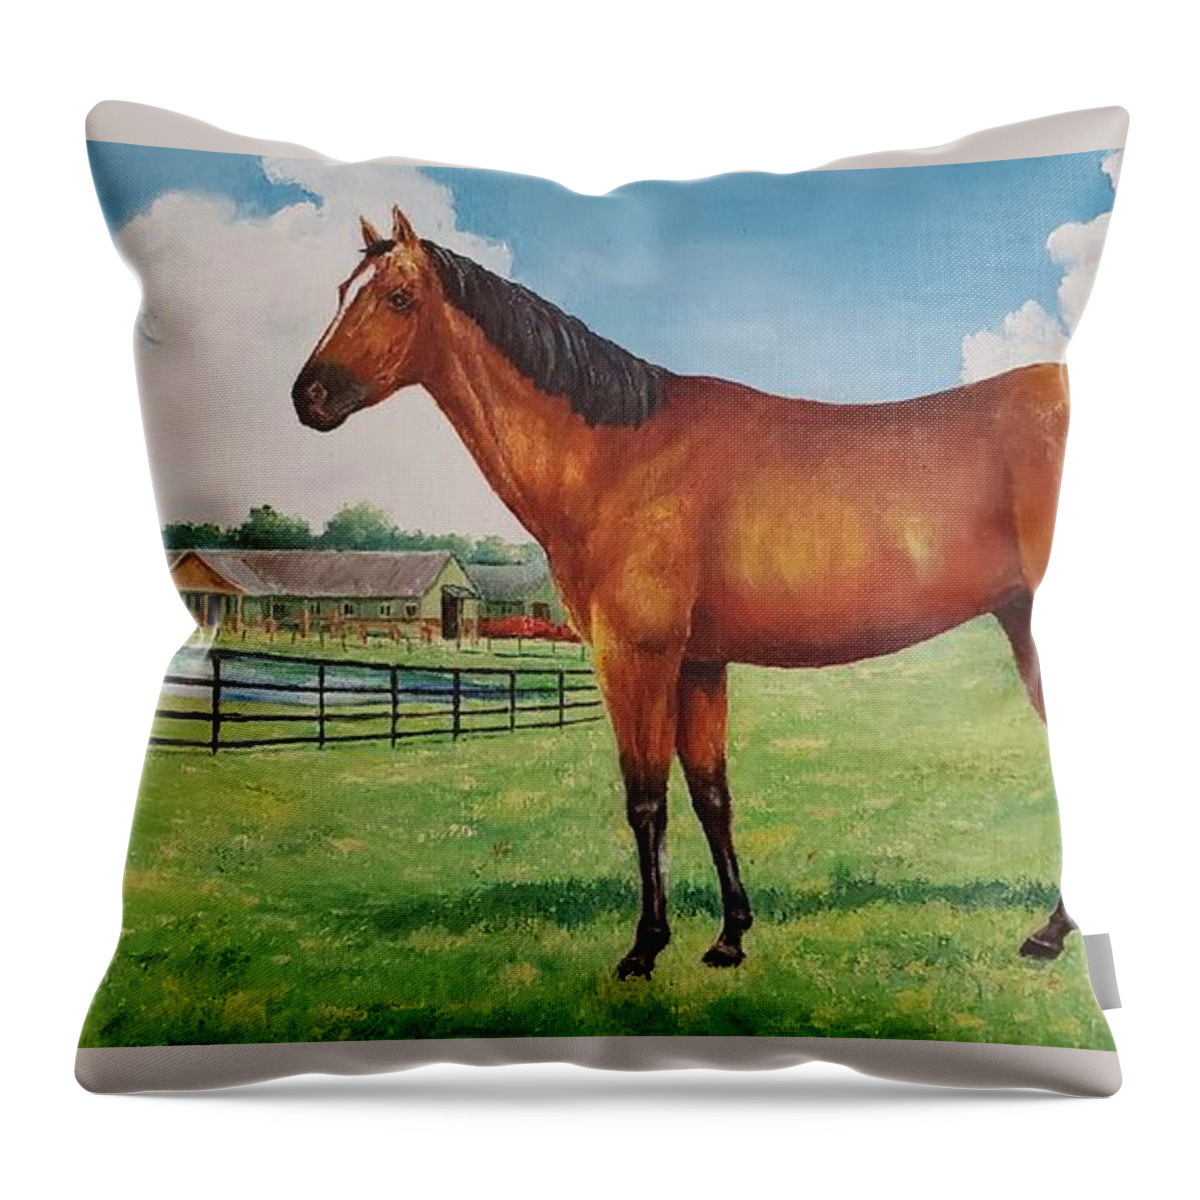 Kentucky Kentucky Derby Equestrian Horse Horseracing Derby Thoroughbred Racing Art Artwork Artist Oil Painting  Throw Pillow featuring the painting Run for the Roses by ML McCormick